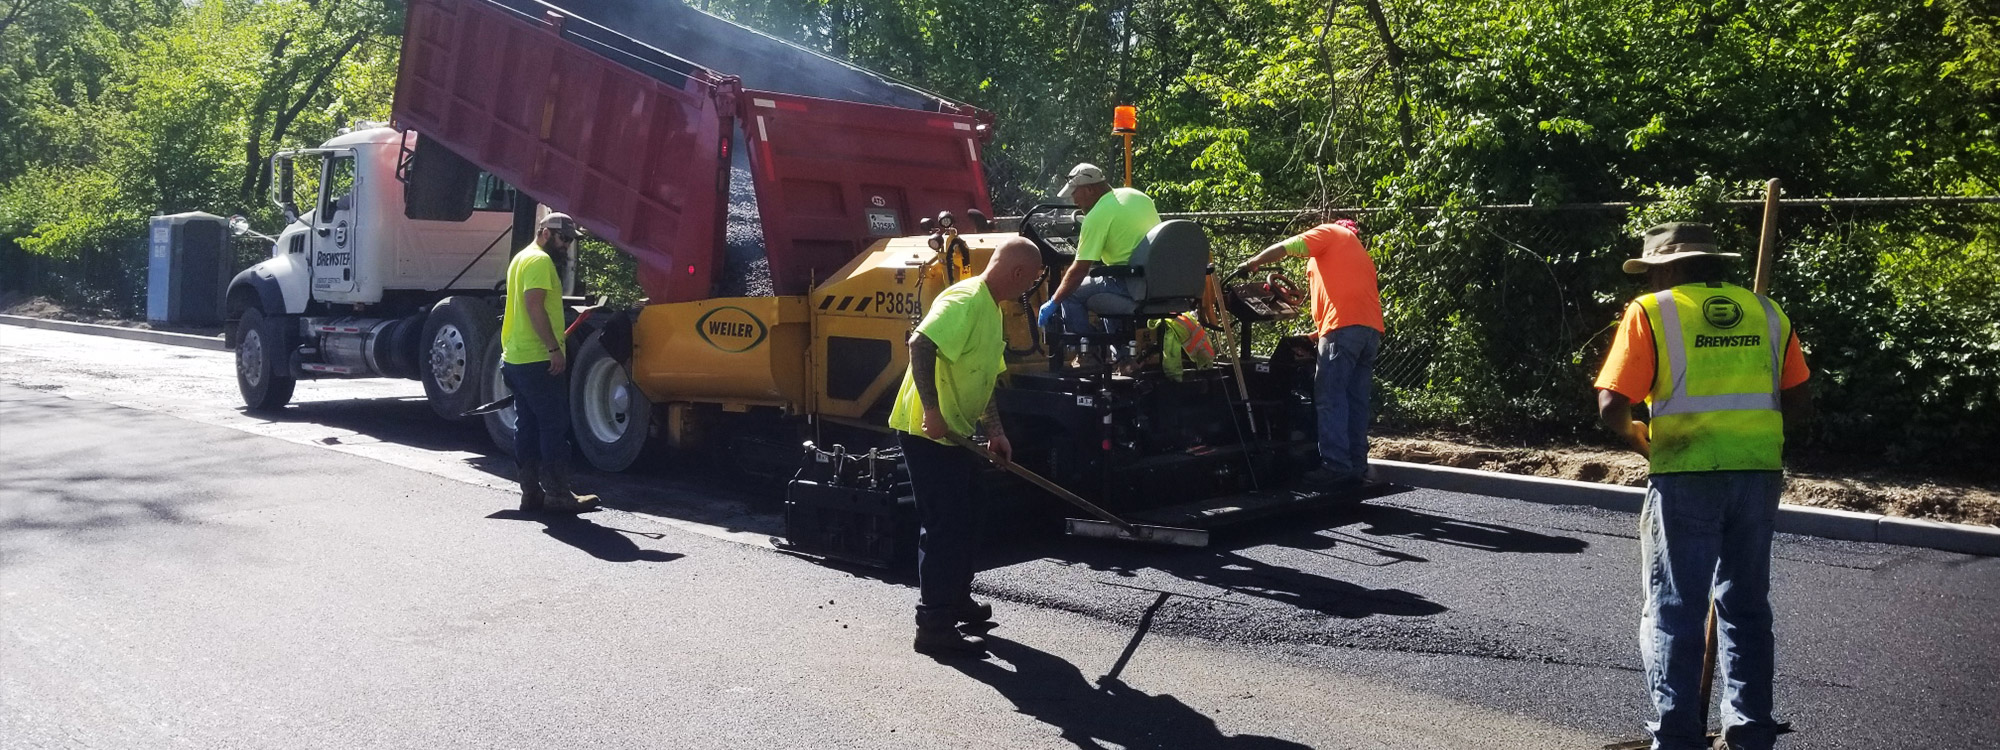 Asphalt paving works from A to Z - civil engineering